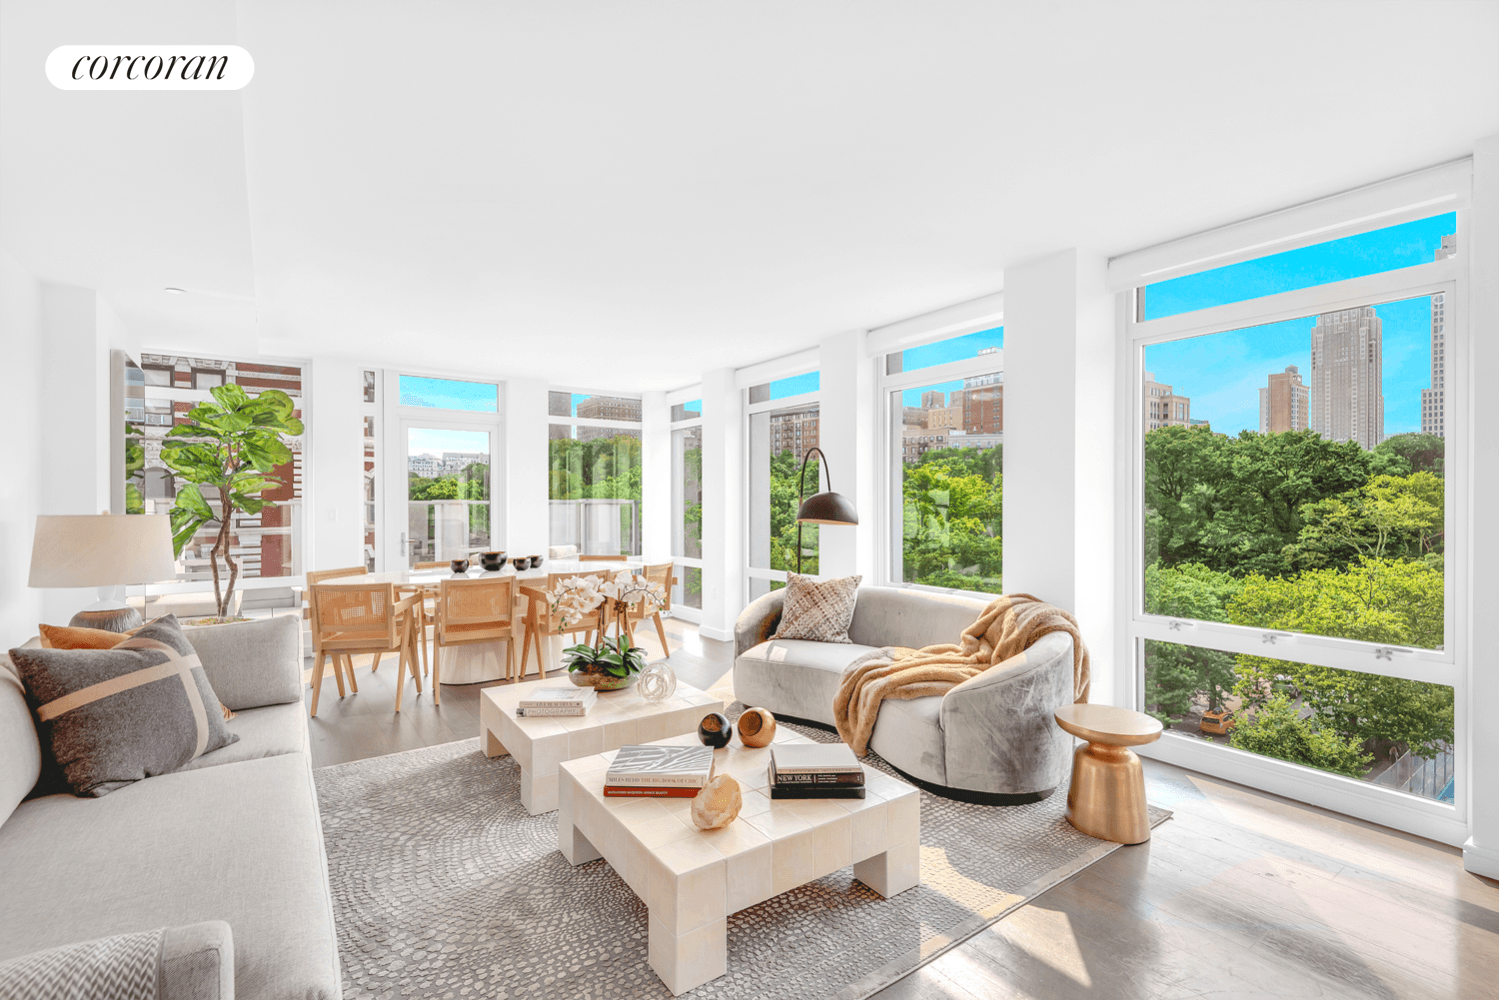 Apartment 7B is a sun drenched and expansive luxury 4 bedroom condominium with a large private terrace overlooking the beauty of Morningside Park from every window.